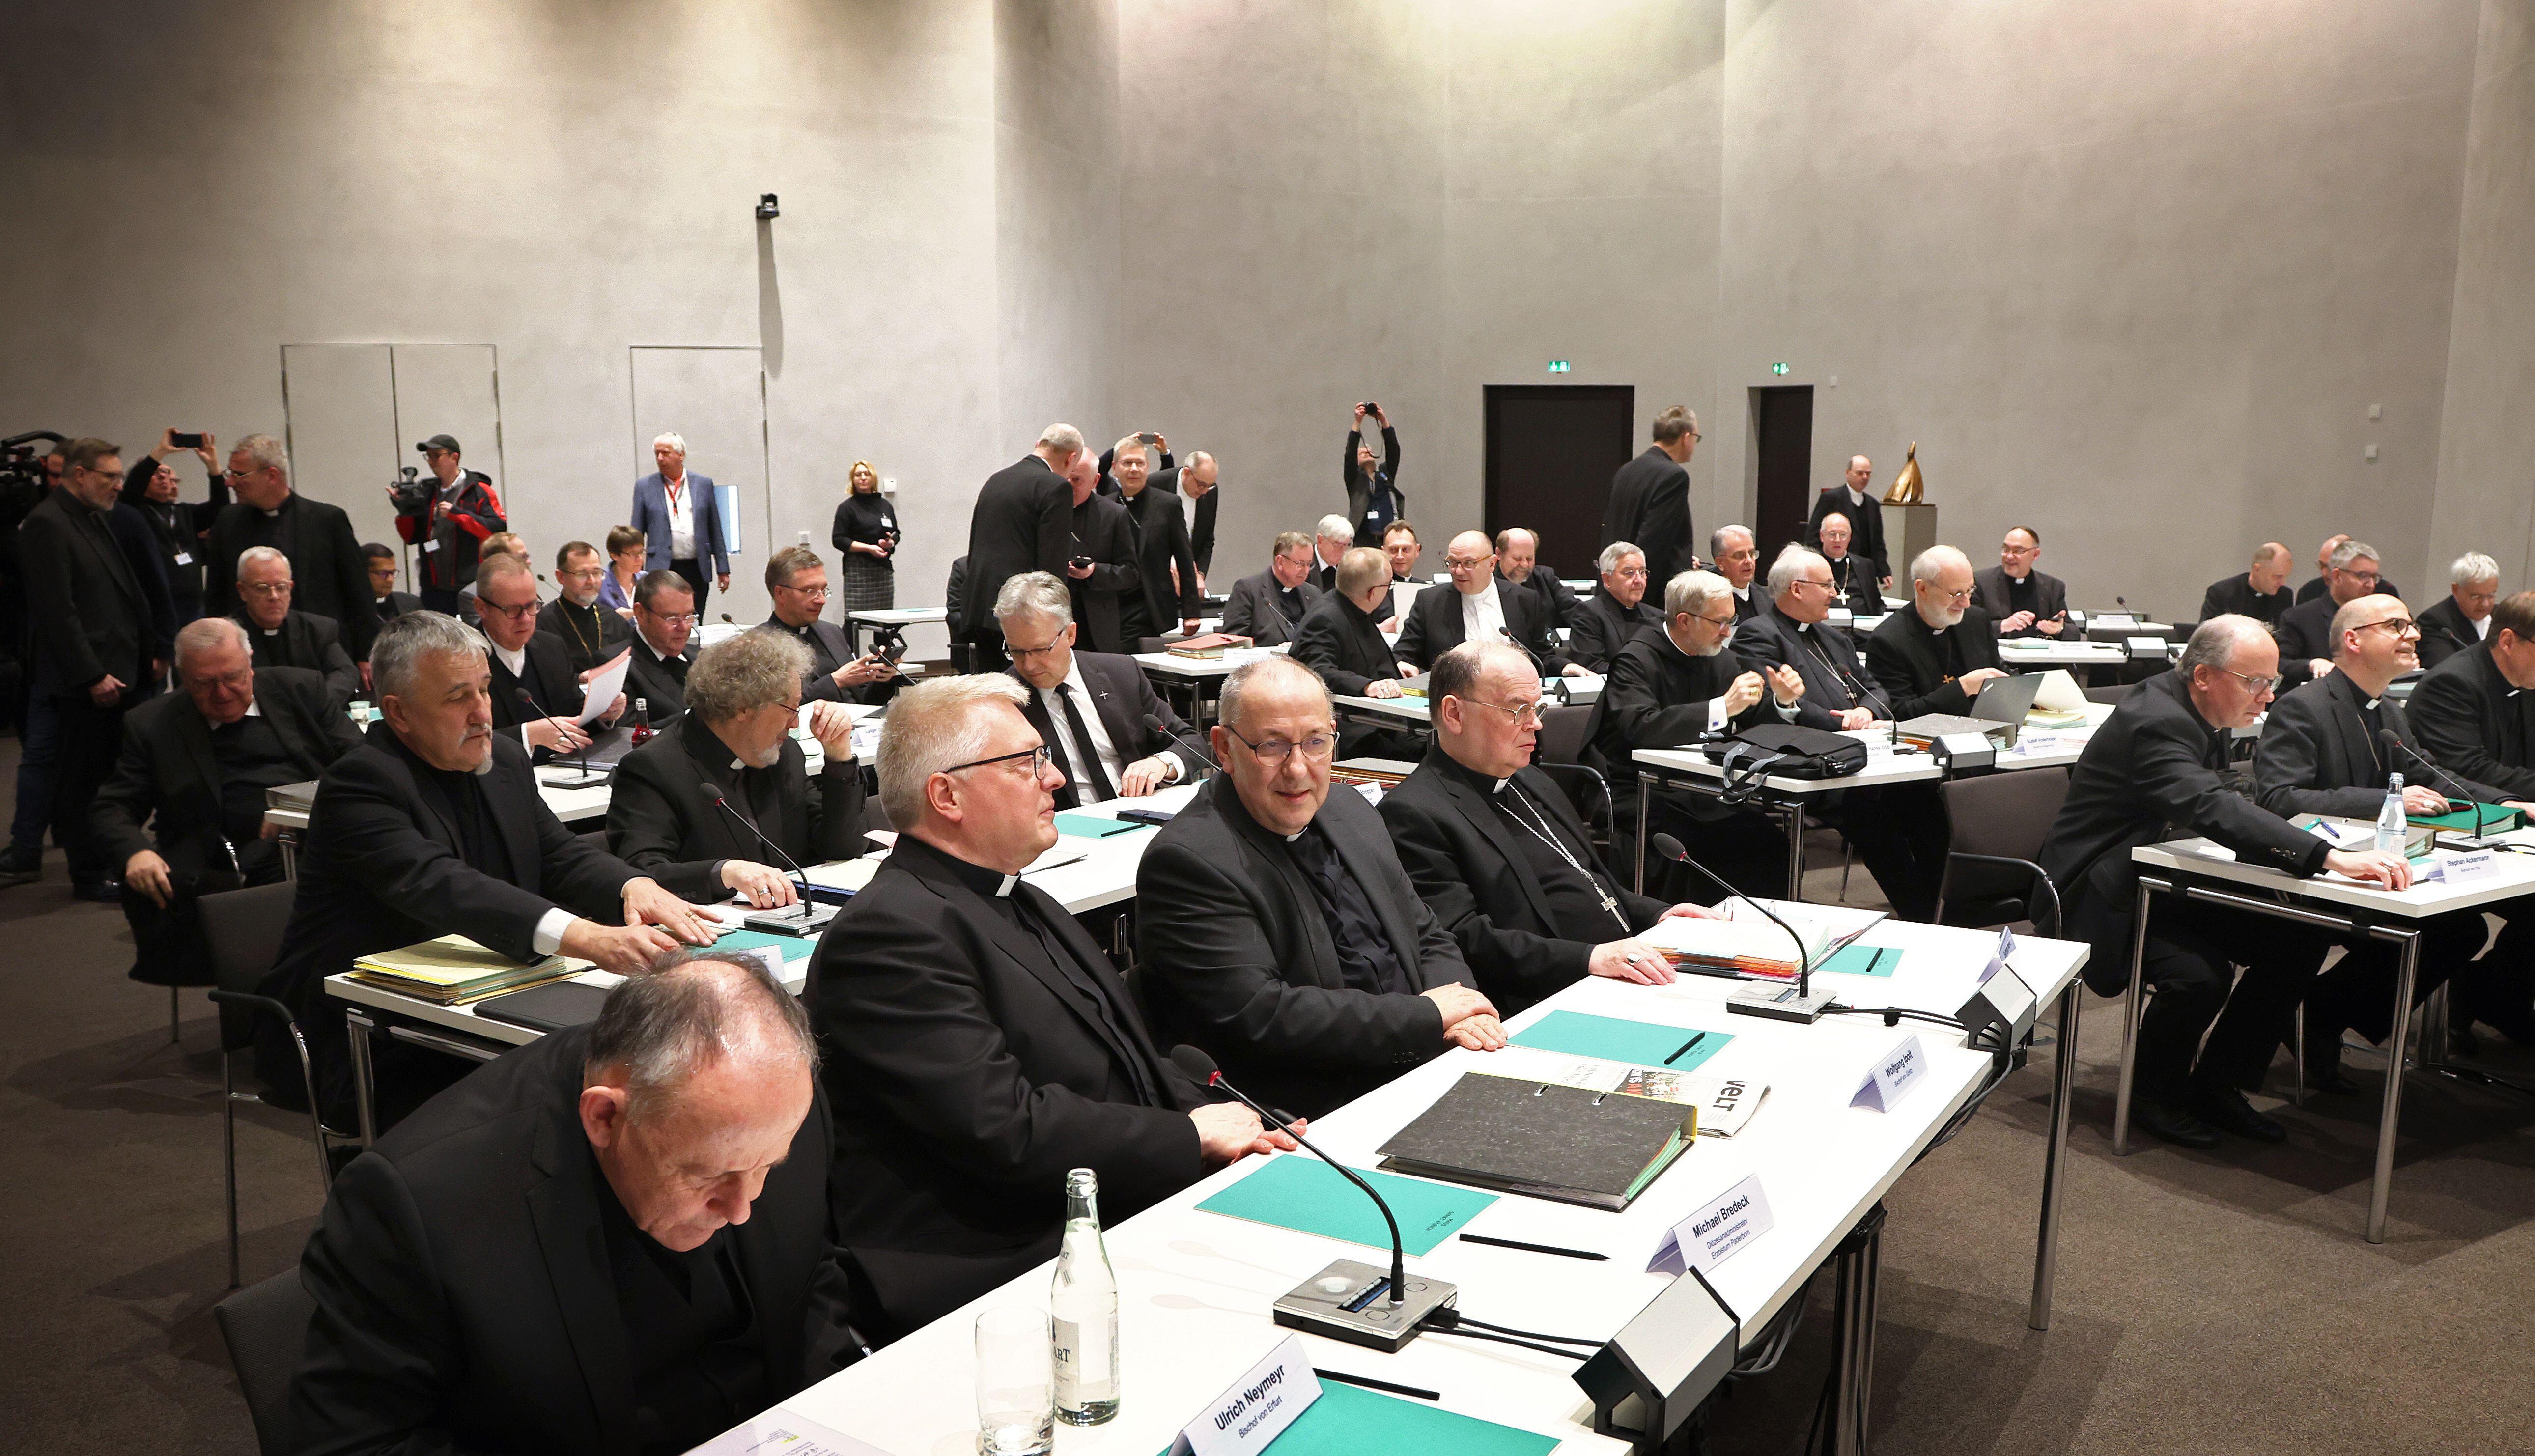 German bishops reach Synodal Path compromise in Rome talks